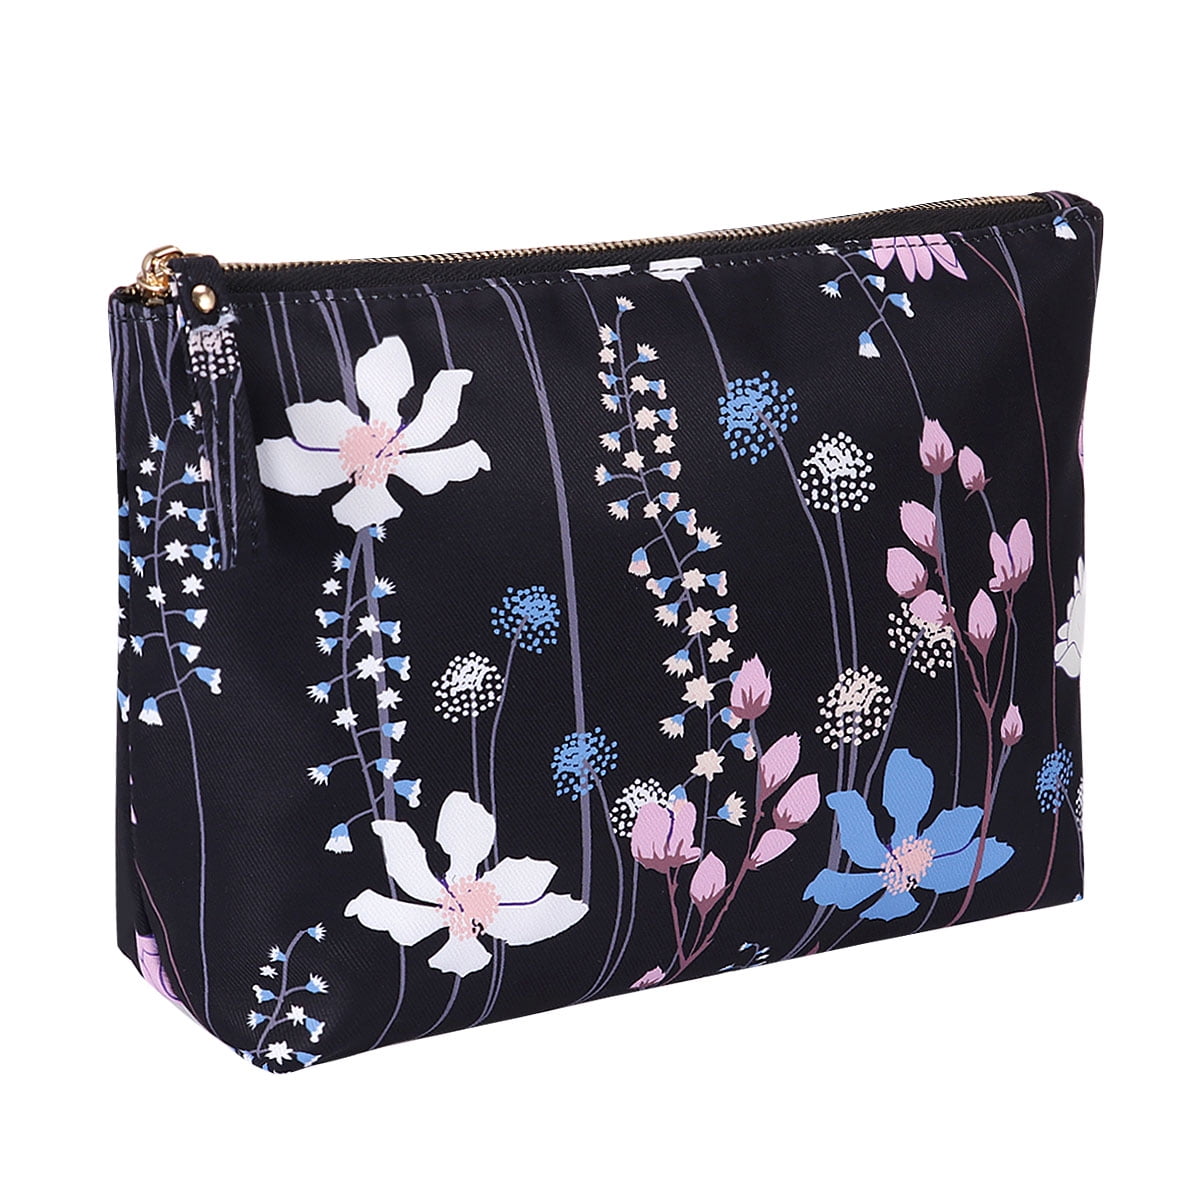 HAWEE Makeup Bags - Cosmetic Bag for Women Zipper Pouch Travel Cosmetic ...